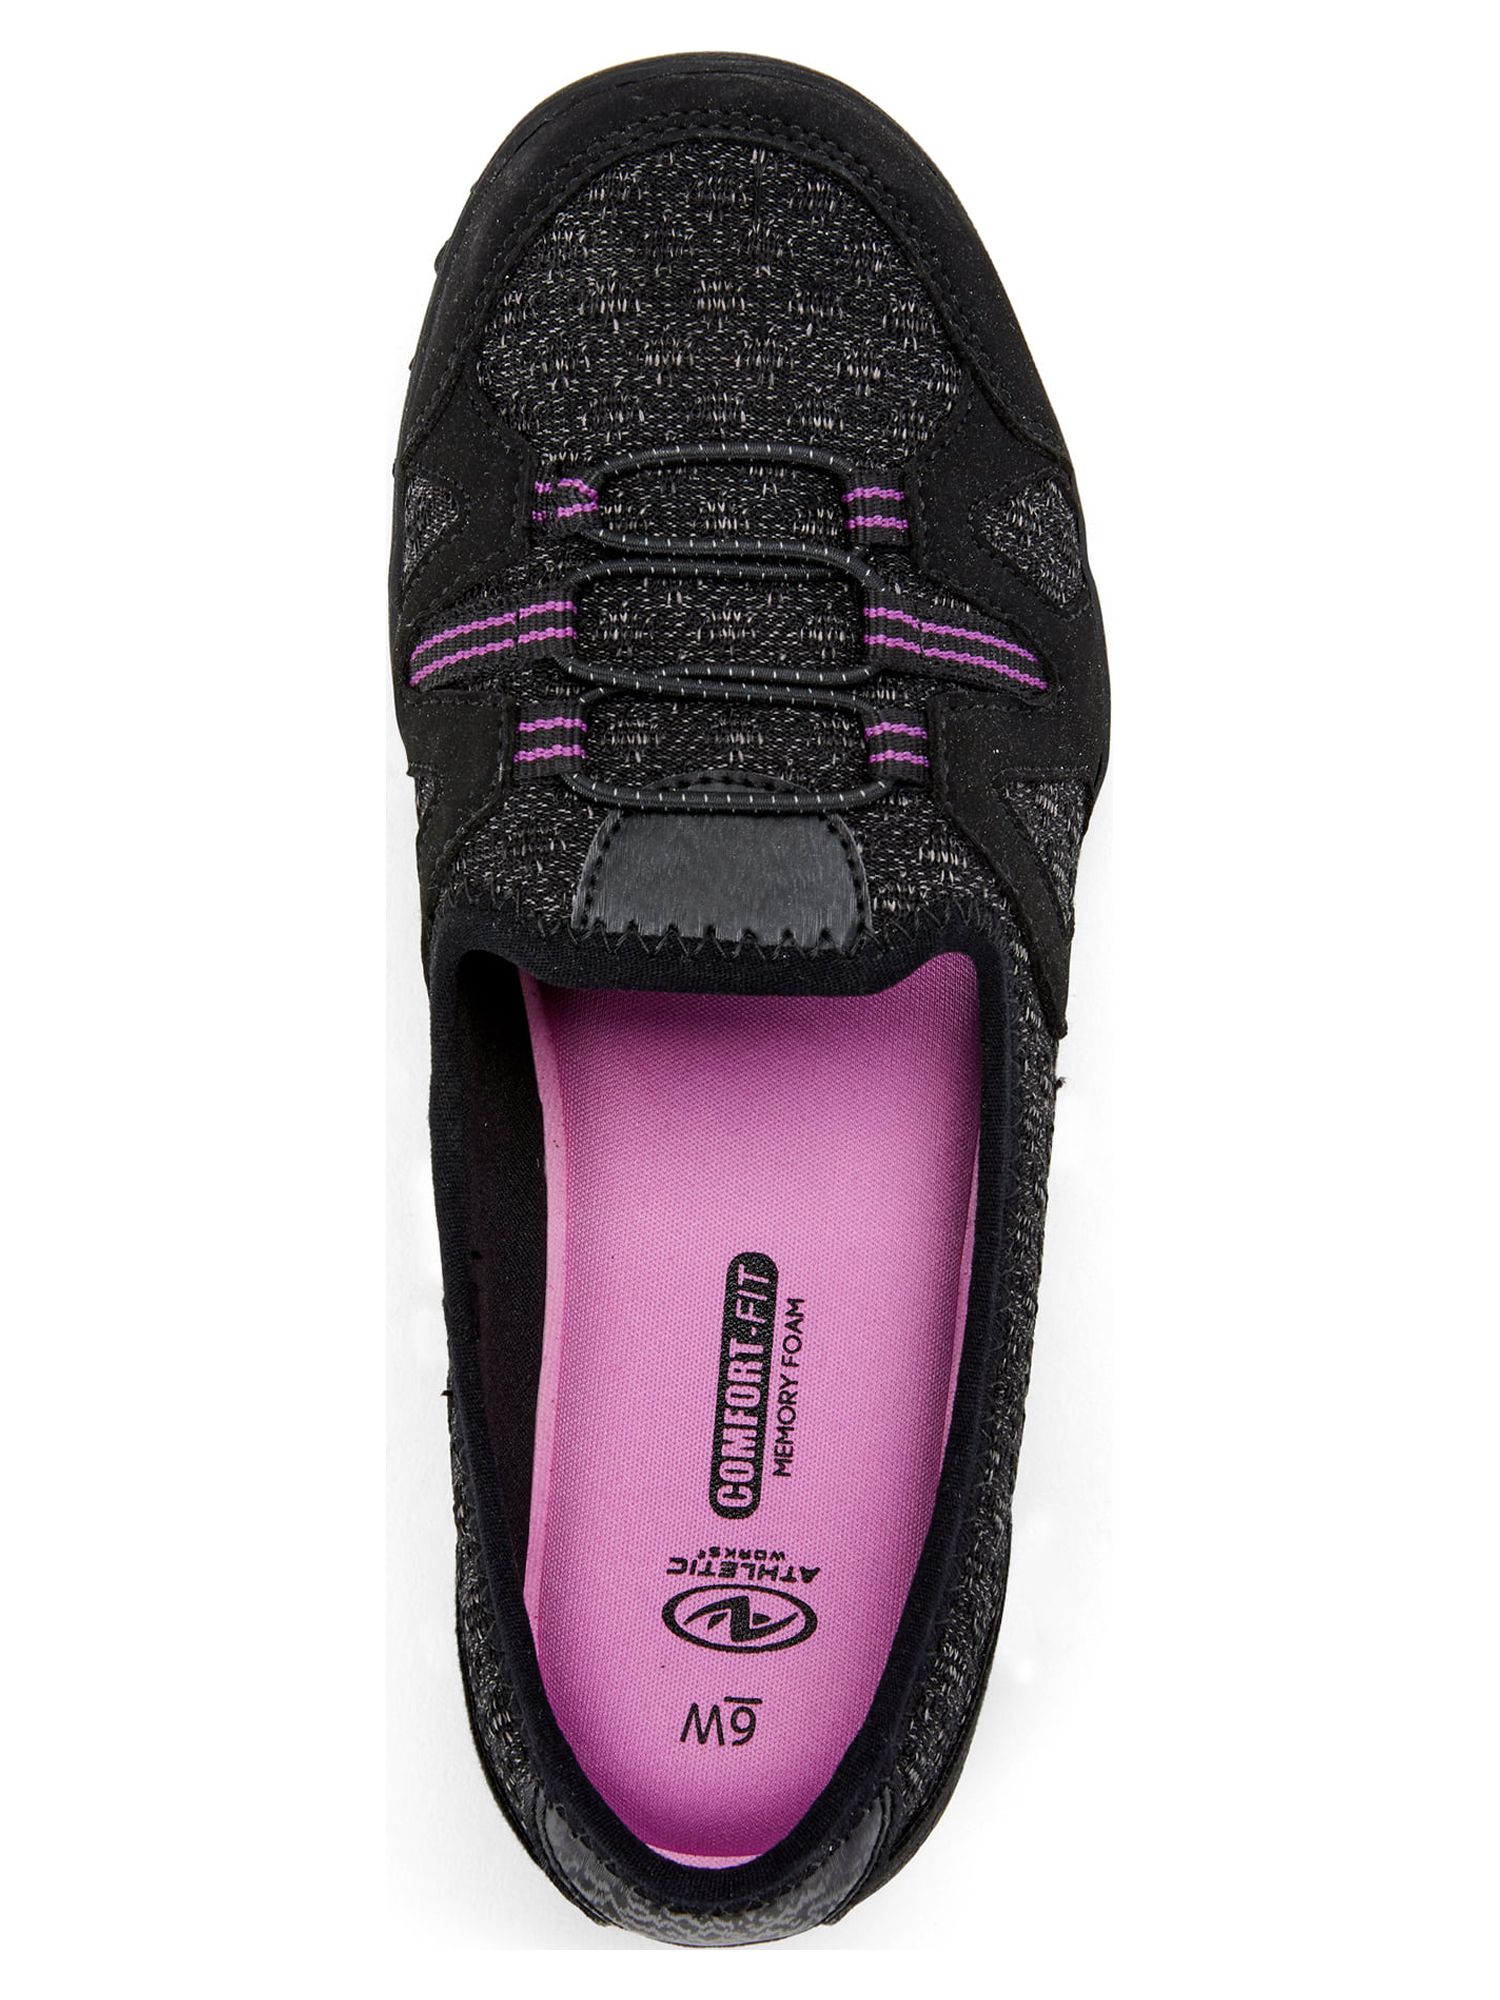 Athletic Works Women's Low Bungee Sneaker (Wide Width Available) - image 4 of 6